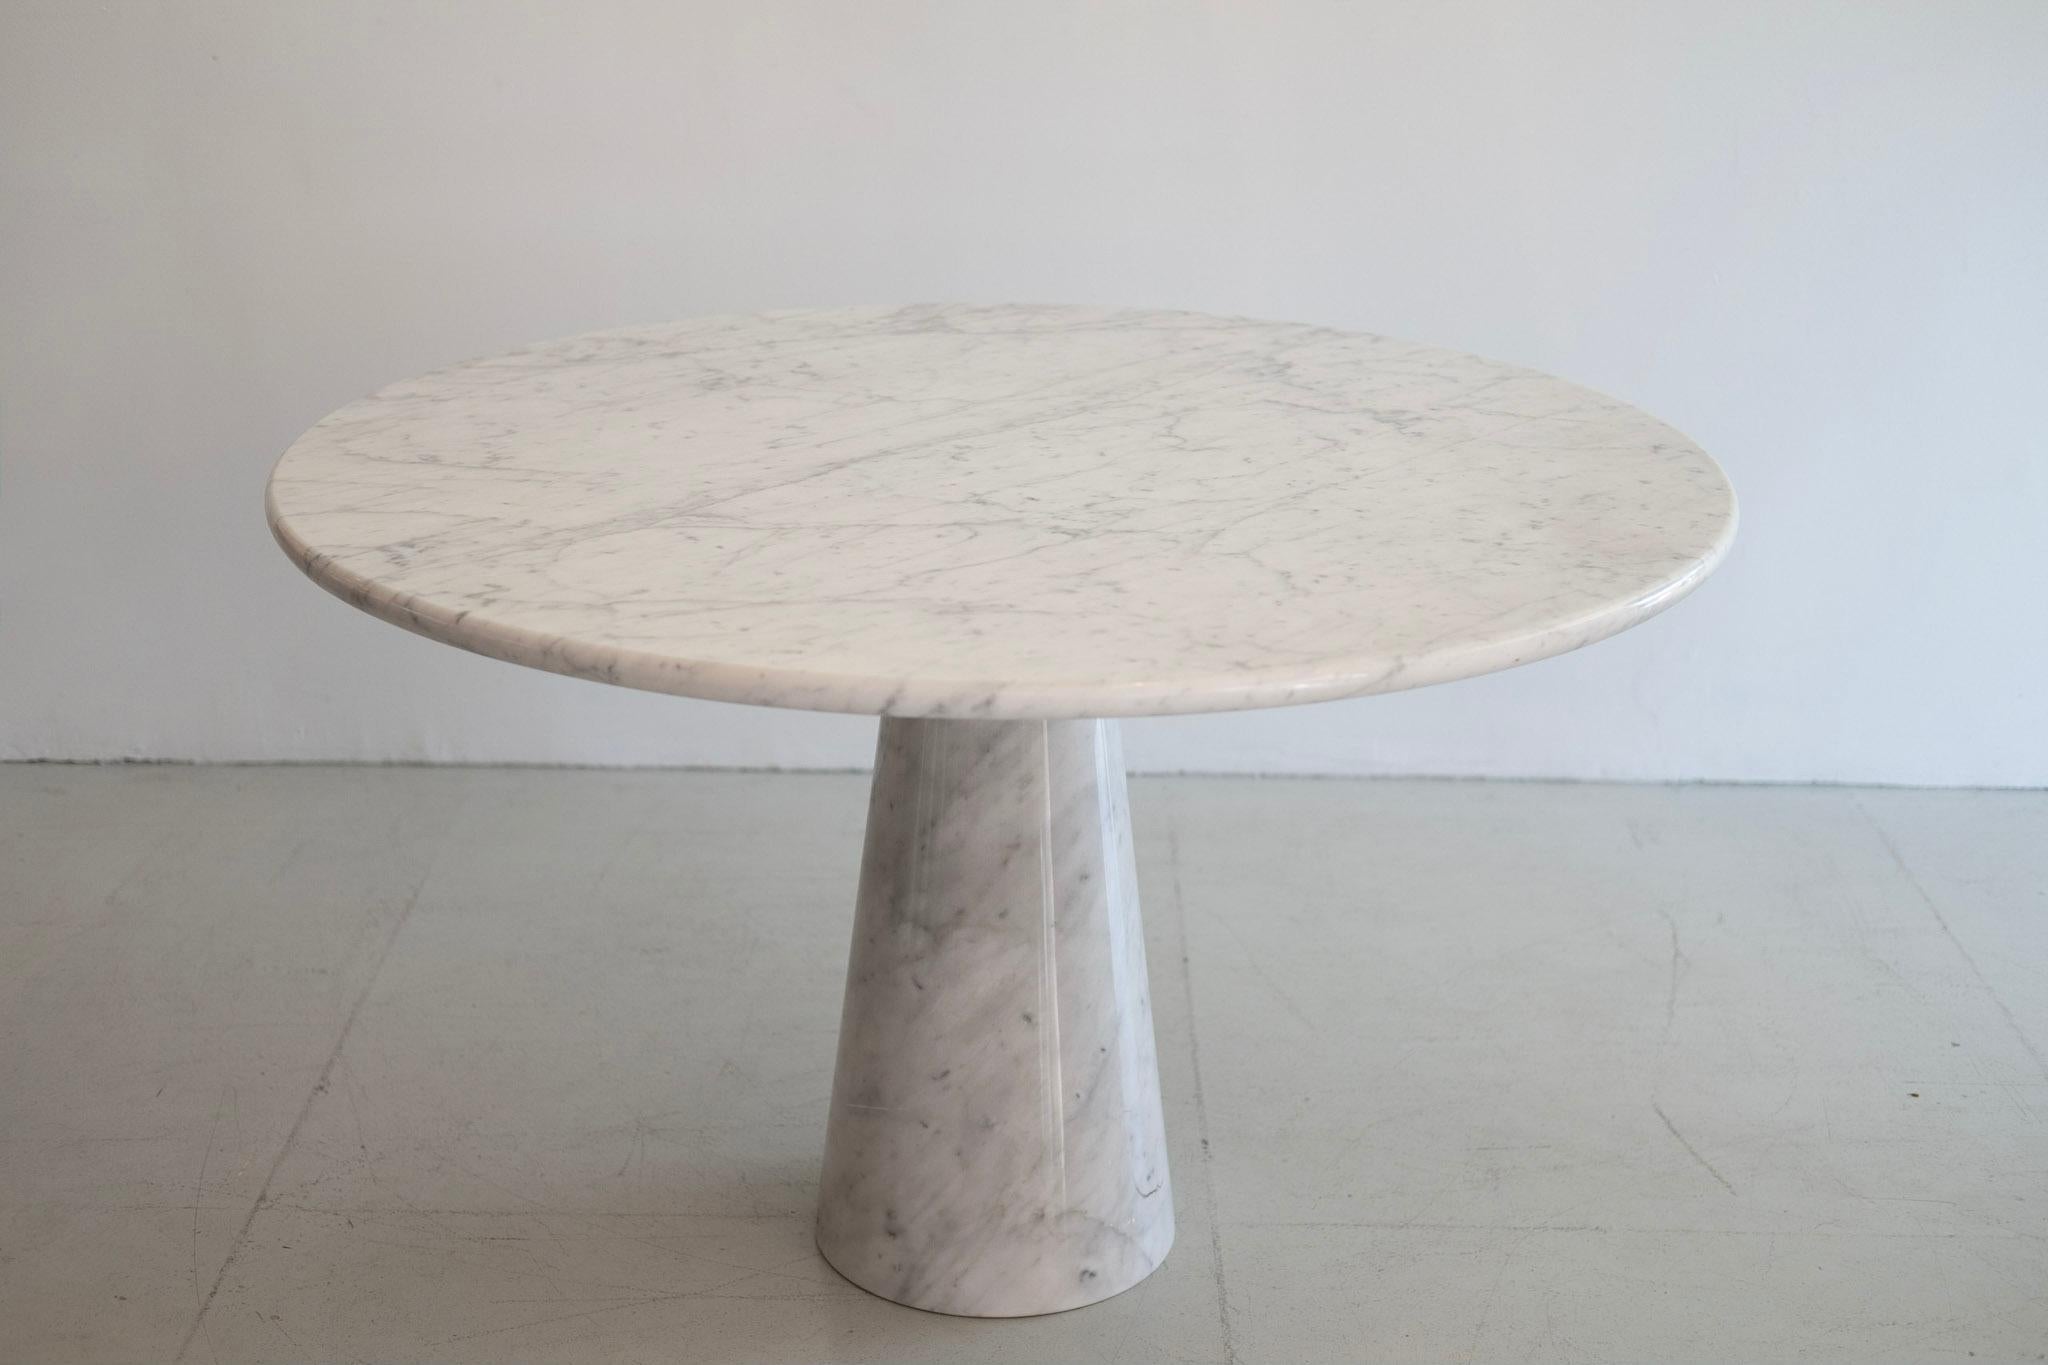 Marble dining table by Angelo Mangiarotti.
Pedestal base with round Carrara marble top.